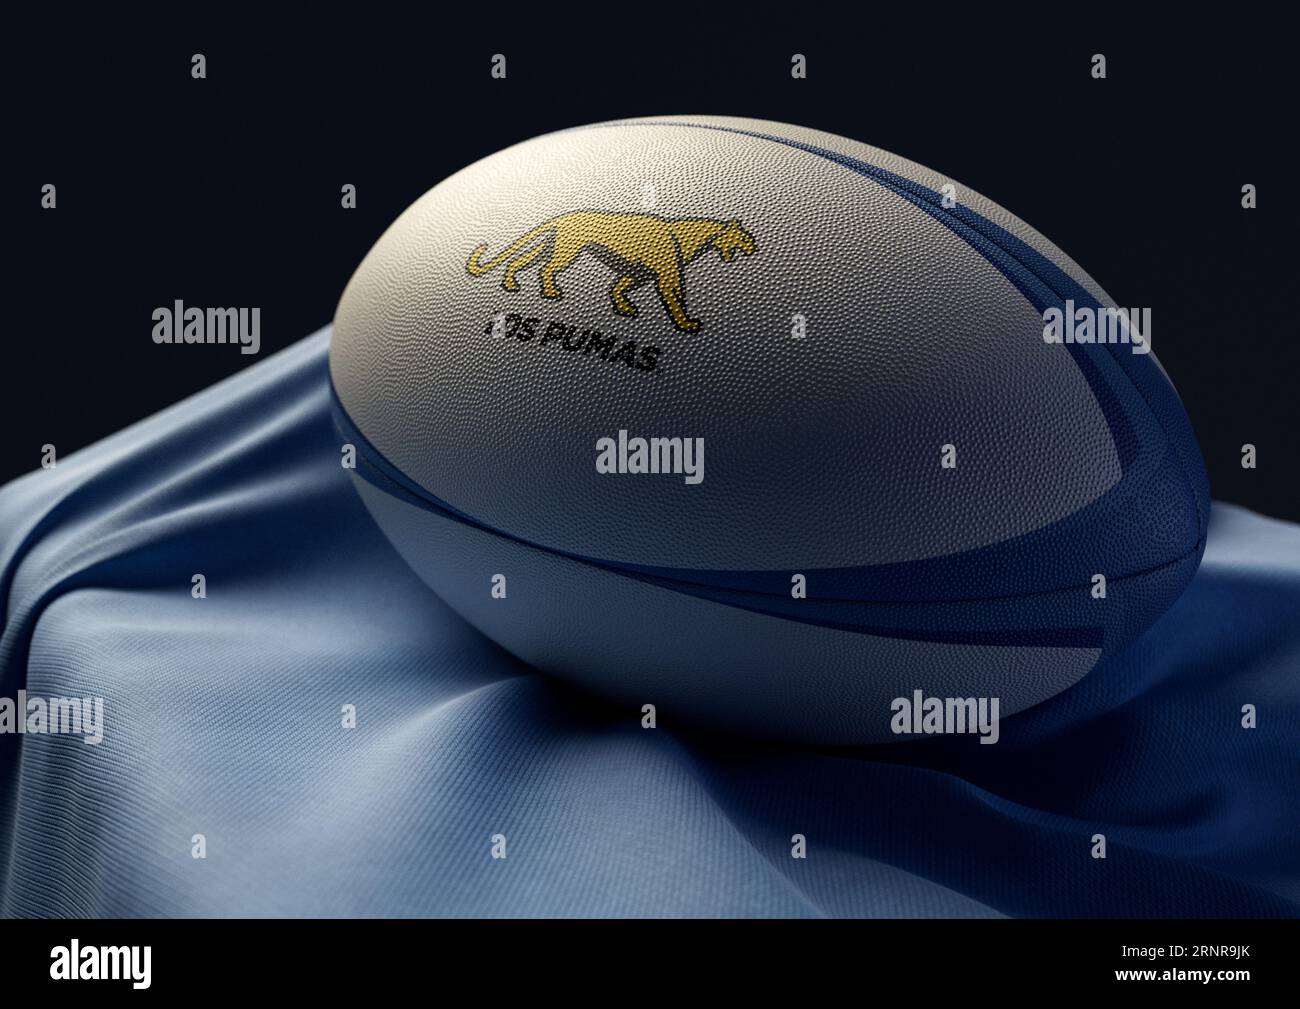 September 2, 2023 - Bristol, United Kingdom: A 3D render of a rugby ball imprinted with the Argentina rugby logo resting on a draped blue fabric Stock Photo